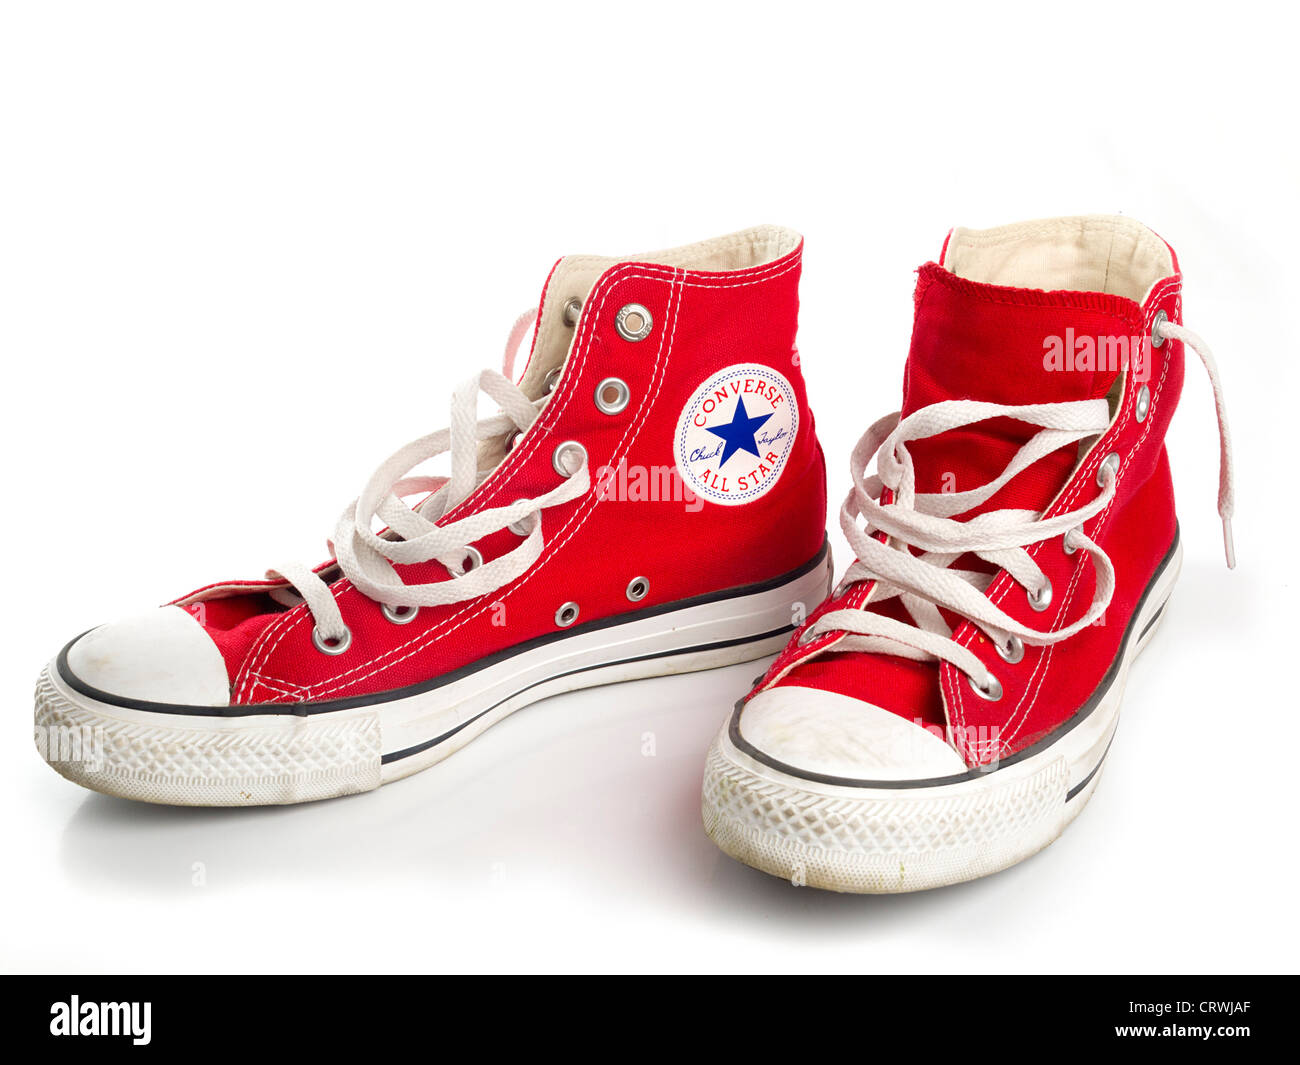 Red Converse Chuck Taylor All Star shoe pair Stock Photo - Alamy